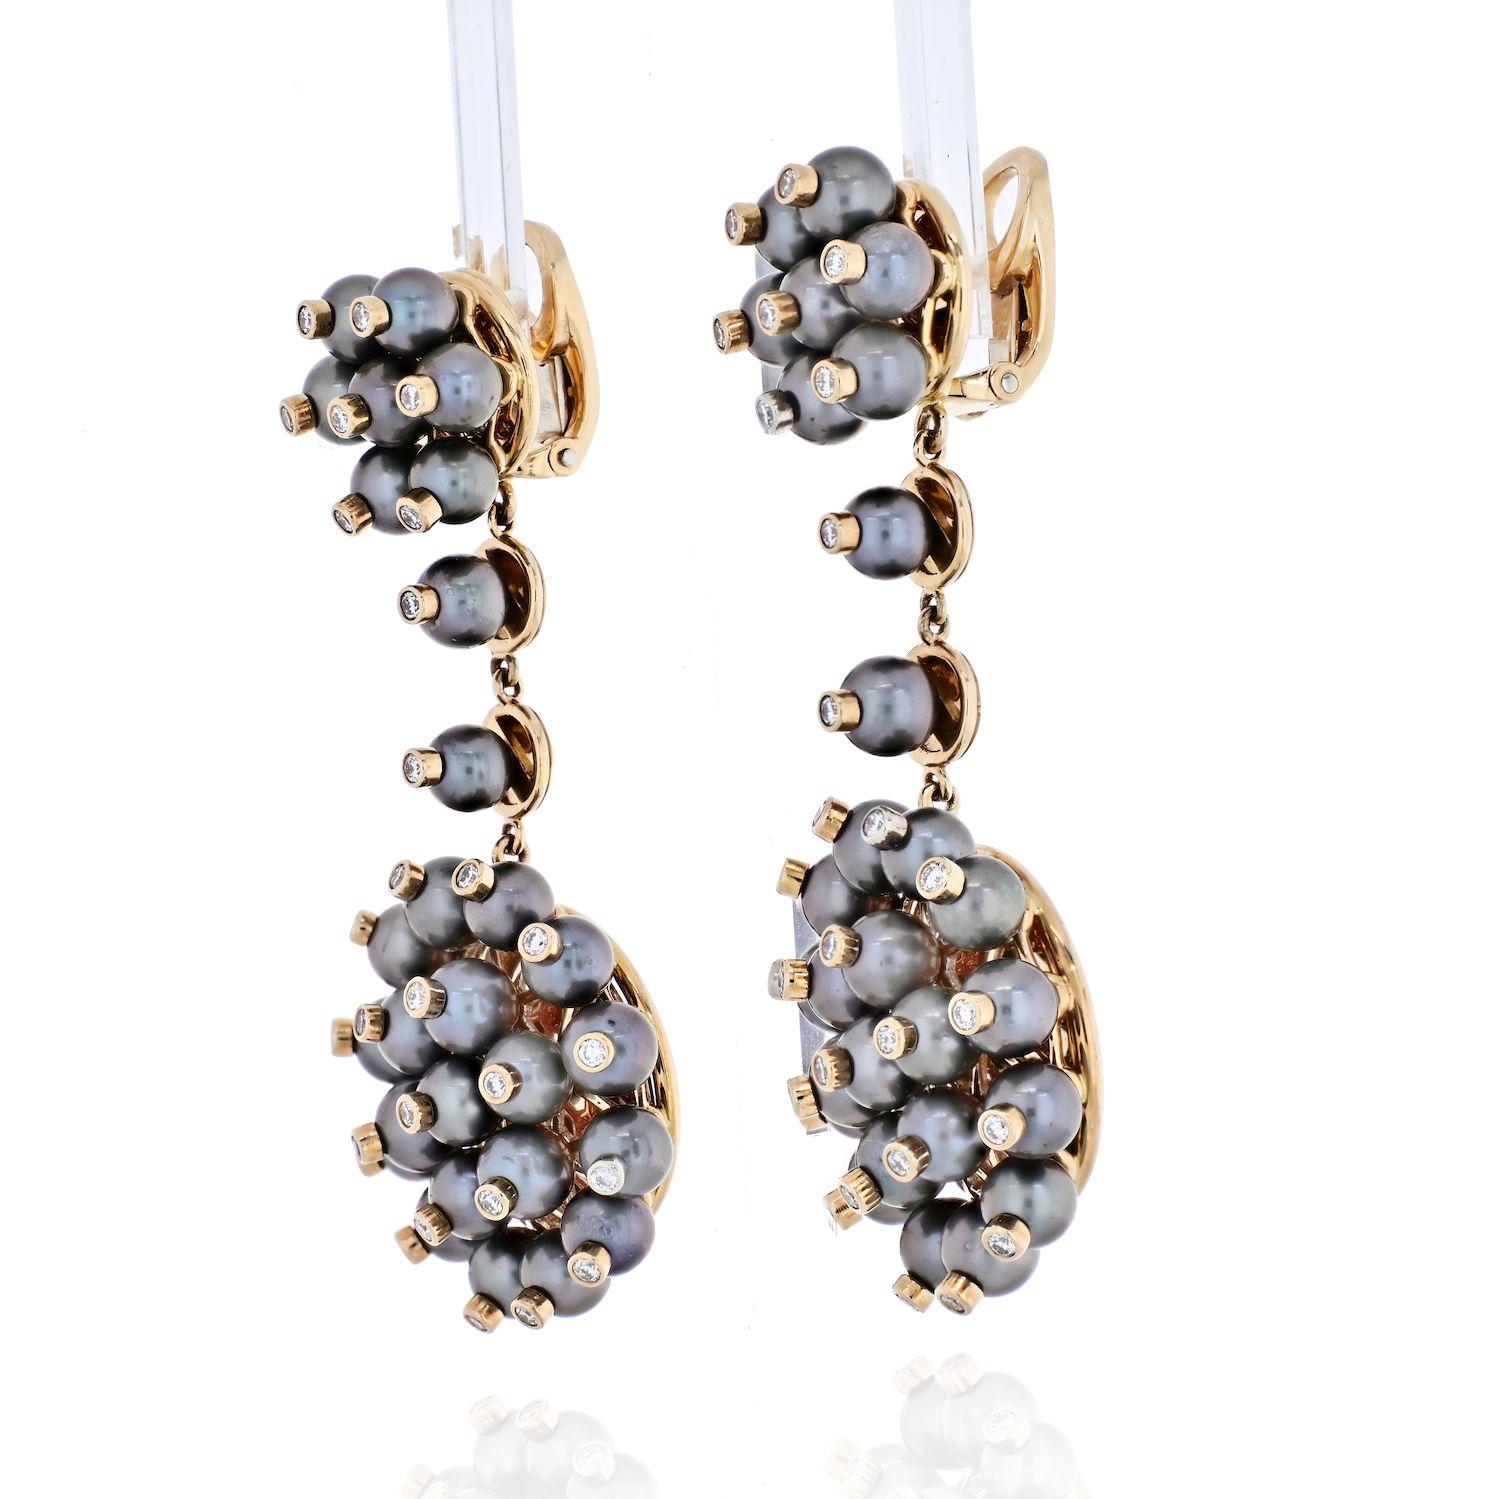 The earrings feature full-cut diamonds weighing a total of 1.12 carats, enhanced by grey cultured pearls measuring 5.00 mm, set in 18k gold, marked Aletto Bros.
Dimensions: 2-1/4 inches x 1 inch
*Note: earrings are designed for non-pierced ears
